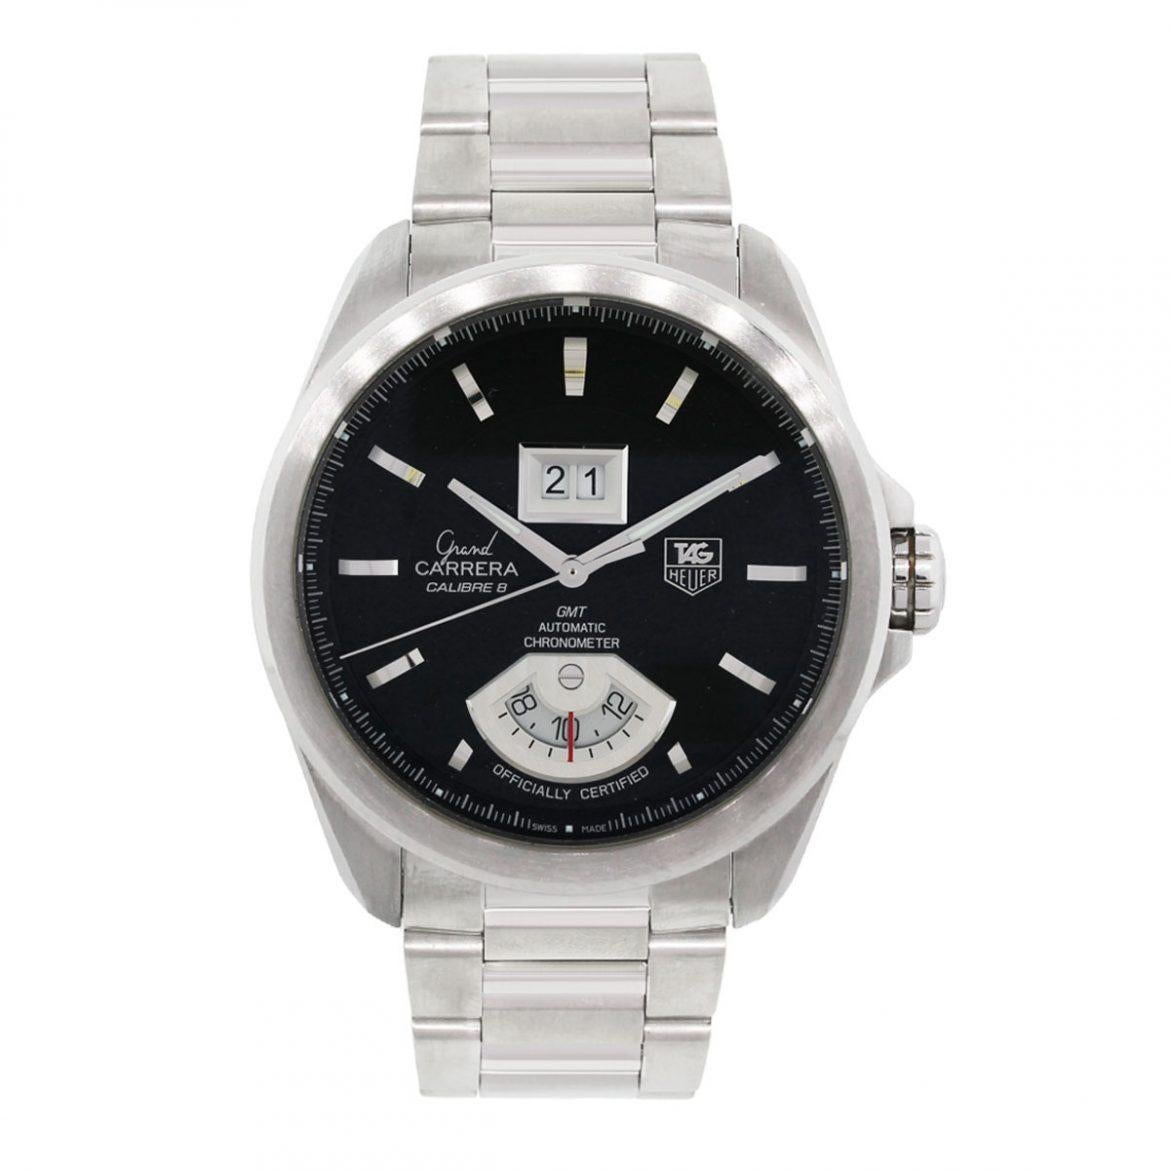 Brand: Tag Heuer
MPN: WAV5111
Model: Grand Carrera
Case Material: Stainless steel
Case Diameter: 42.5mm
Crystal: Sapphire crystal (scratch resistant)
Bezel: Smooth brushed stainless steel bezel
Dial: Black dial
Bracelet: Stainless steel
Size: Will